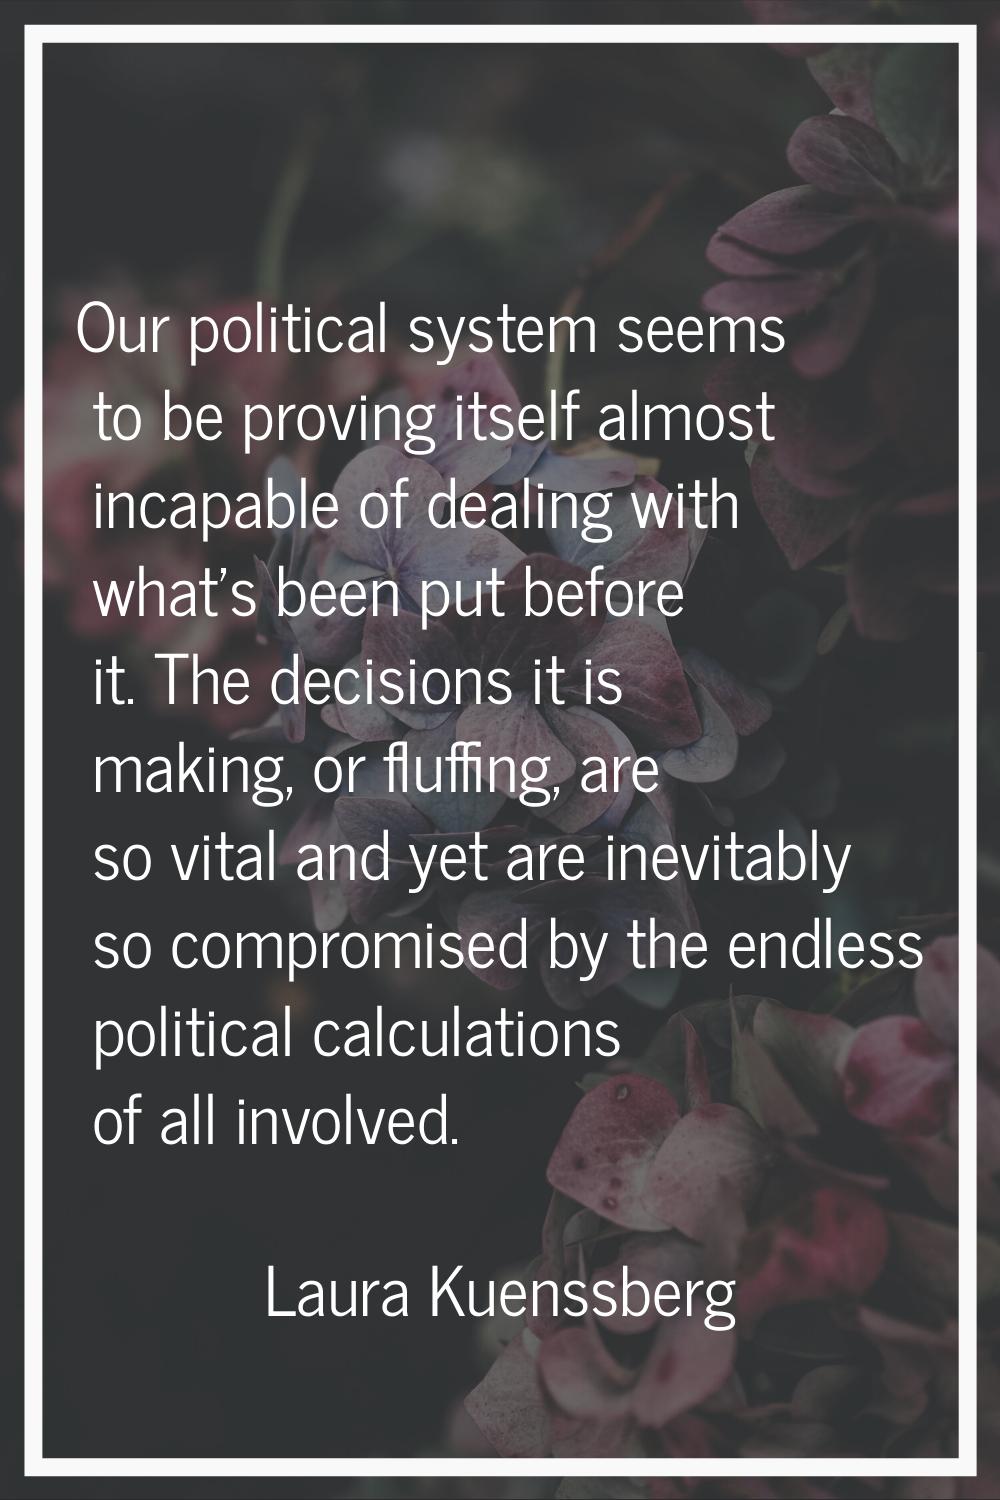 Our political system seems to be proving itself almost incapable of dealing with what's been put be